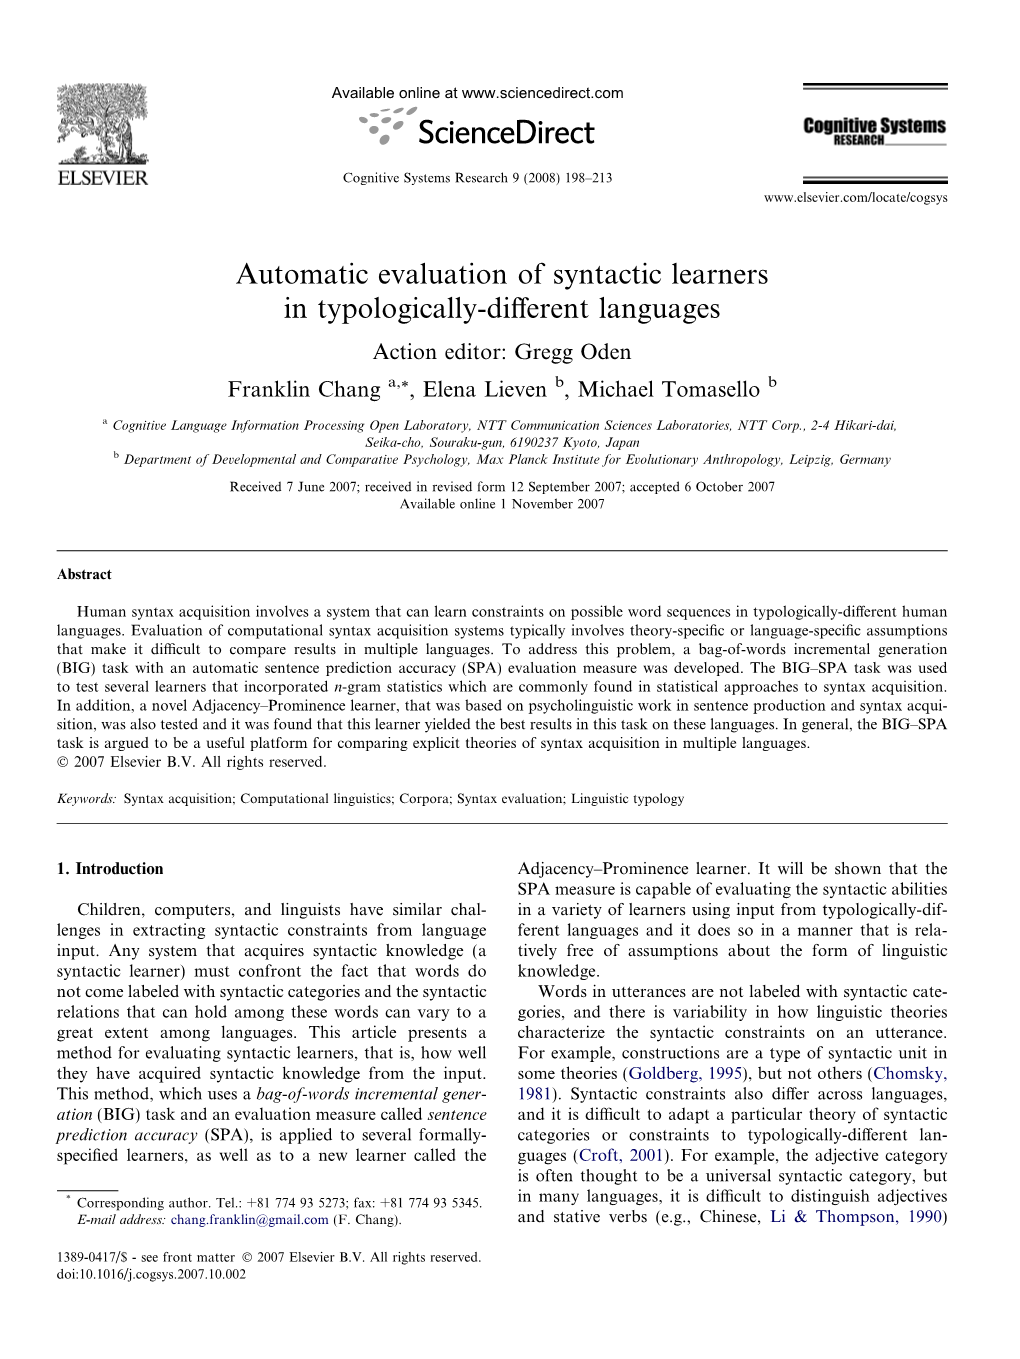 Automatic Evaluation of Syntactic Learners in Typologically-Different